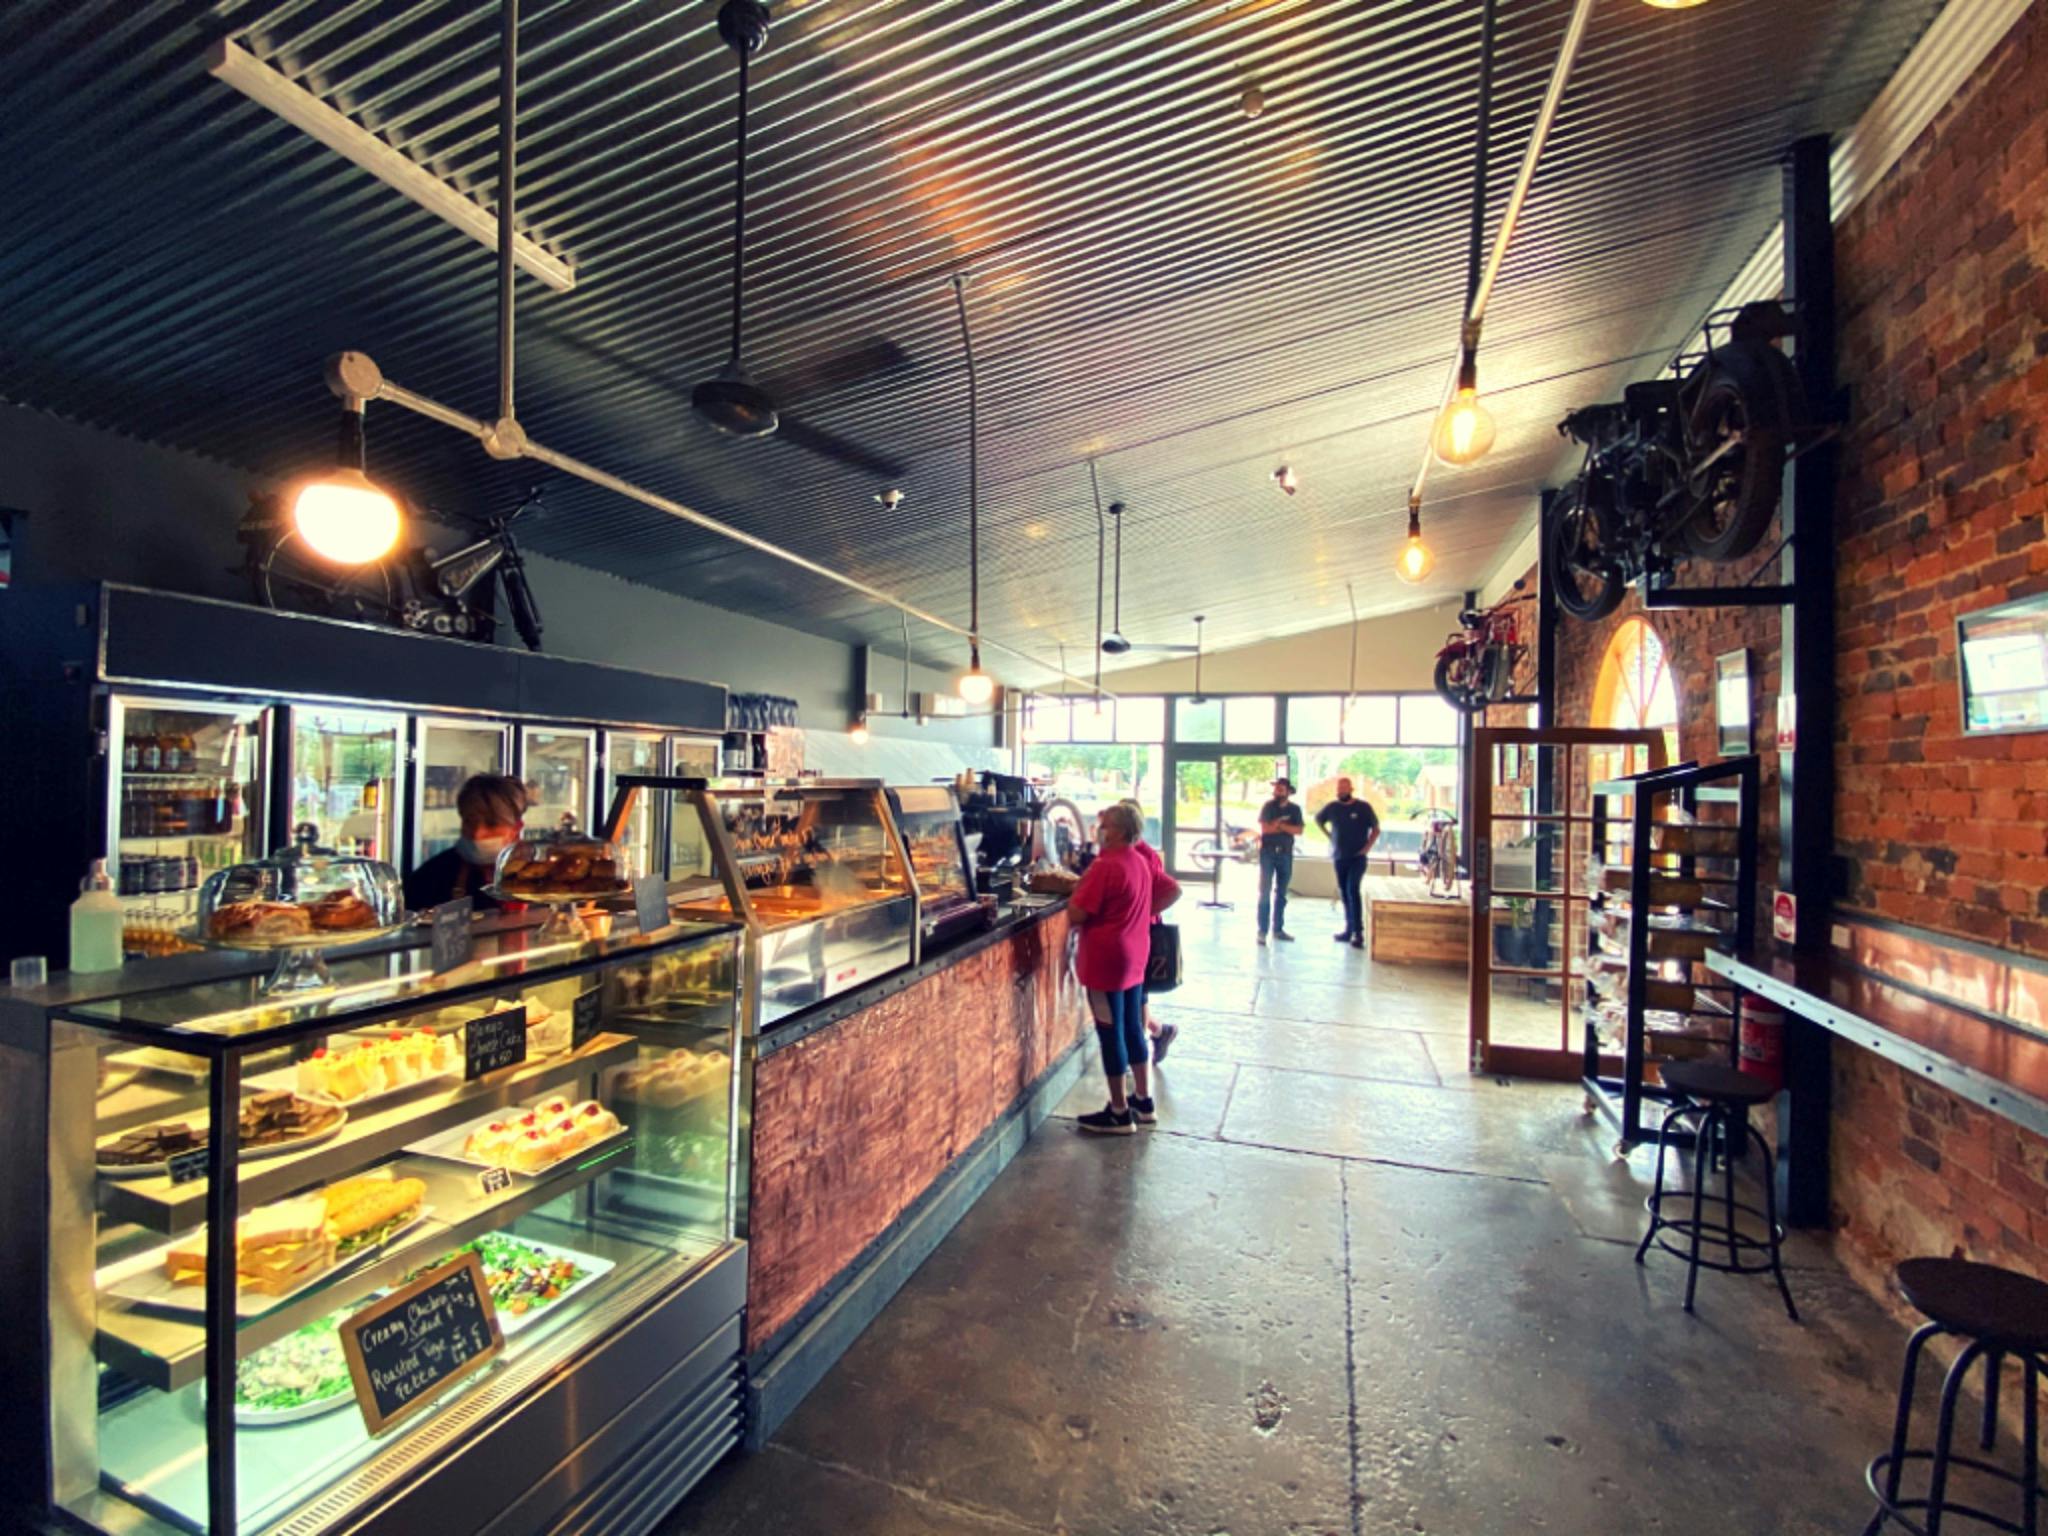 View of the main bakery cafe space, polished concrete floors, rustic brick walls